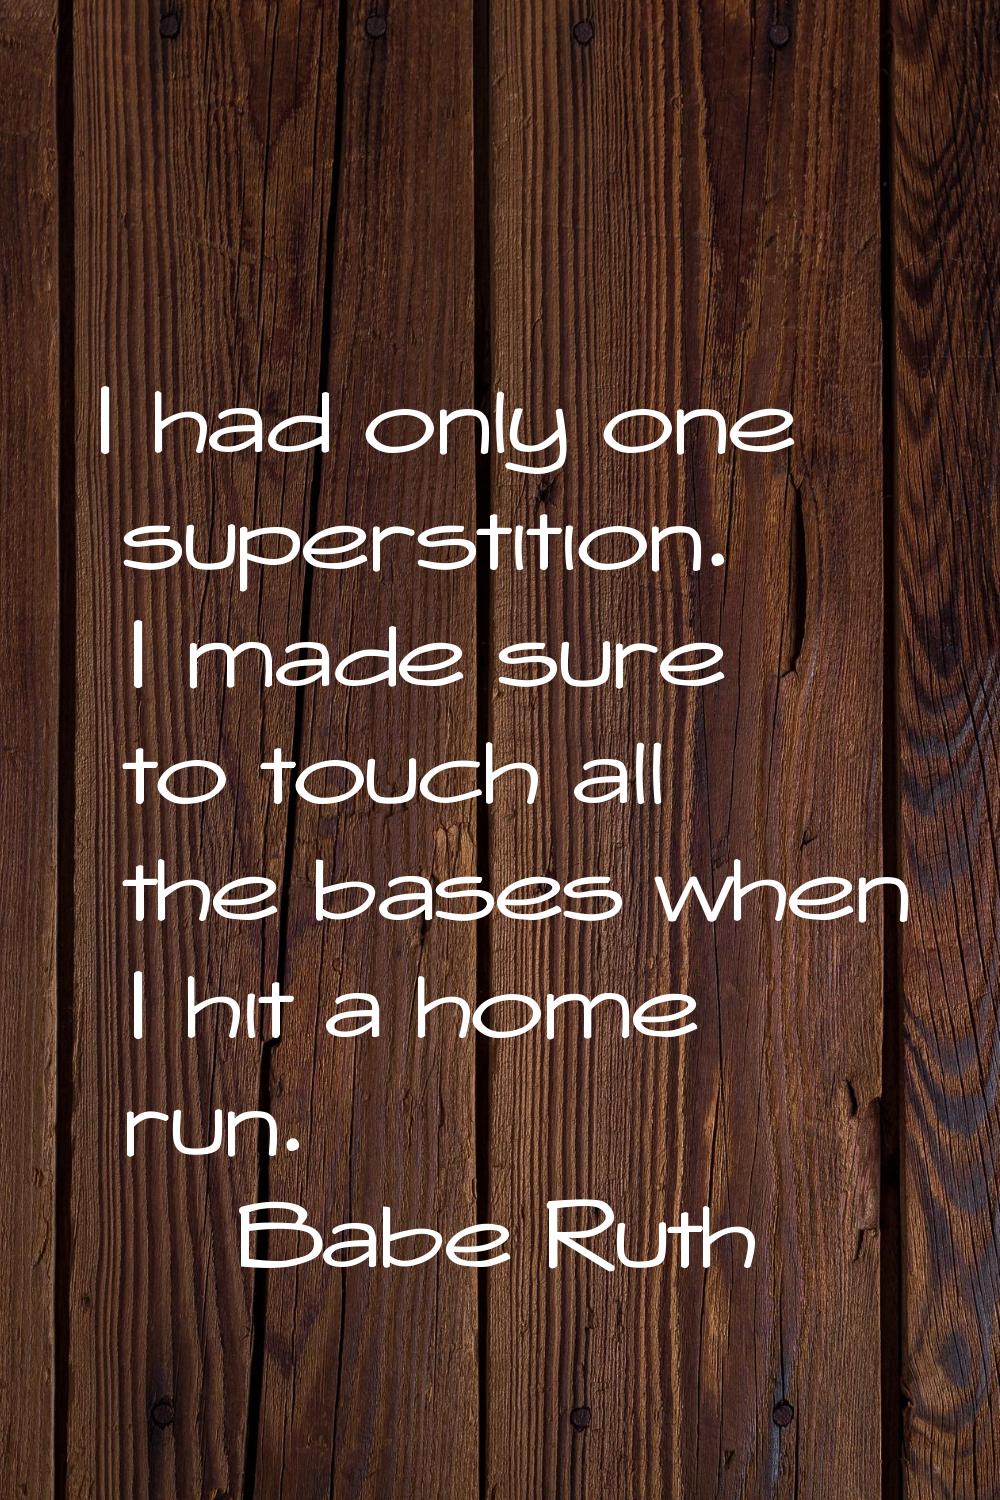 I had only one superstition. I made sure to touch all the bases when I hit a home run.